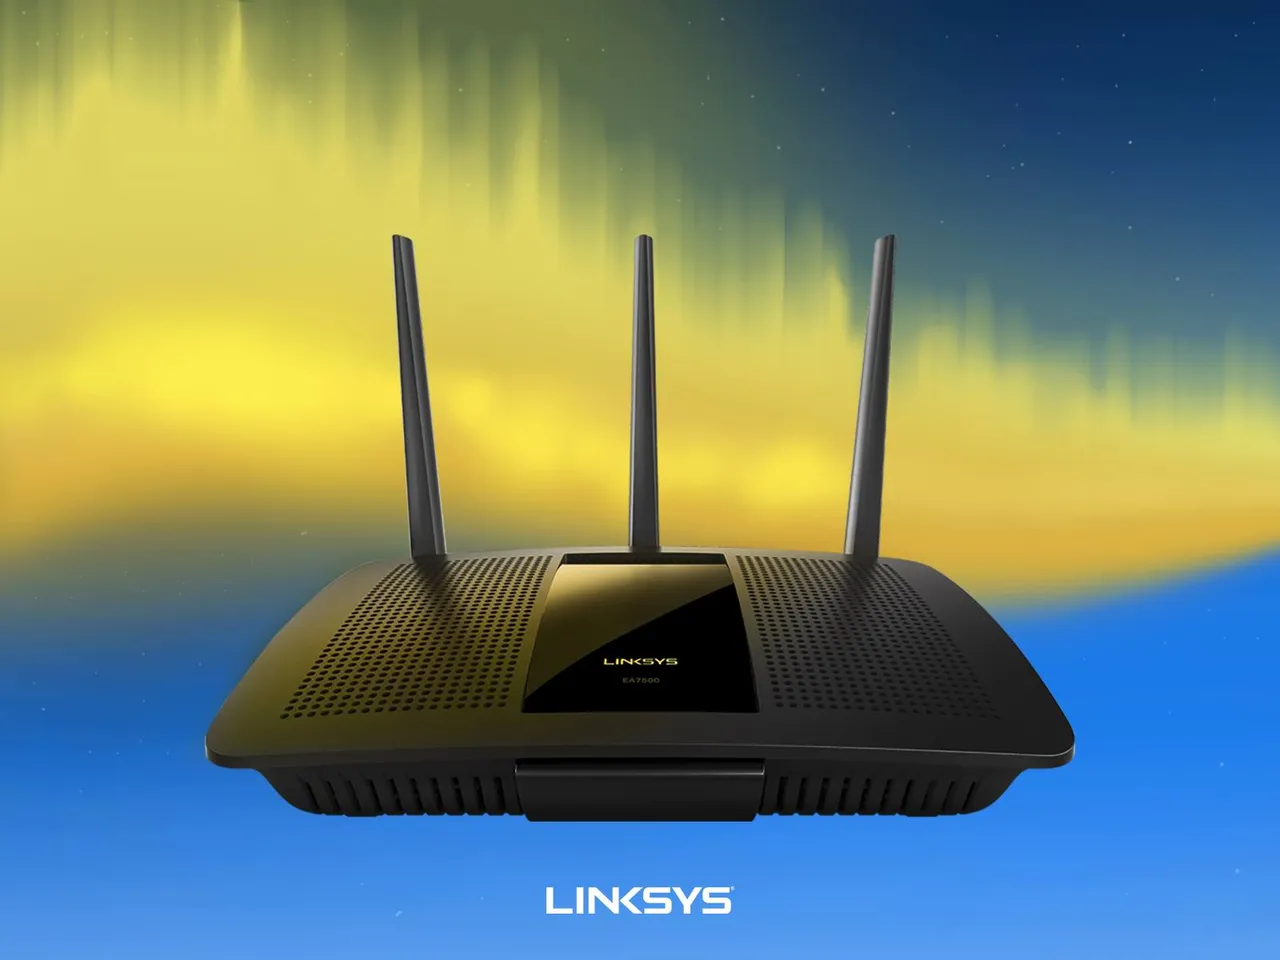 Linksys India launches the powerful Gigabit Router